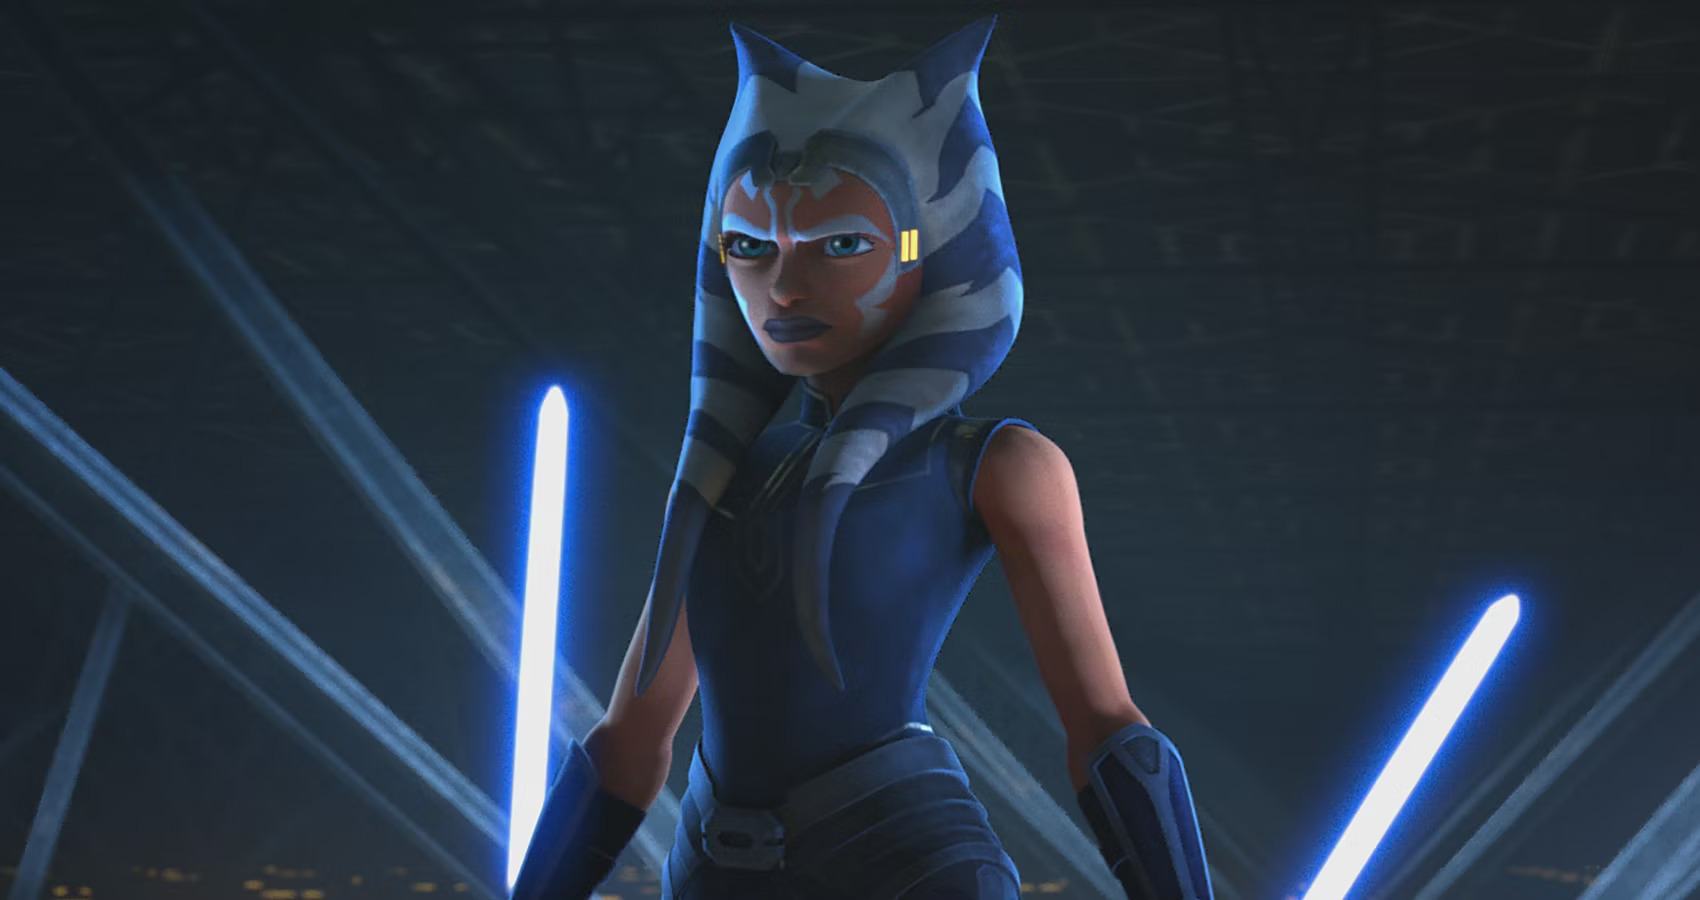 Ahsoka is one of the most complex characters in the Star Wars universe, so it's not surprising that the reason she left the Jedi Order was a complicated one.